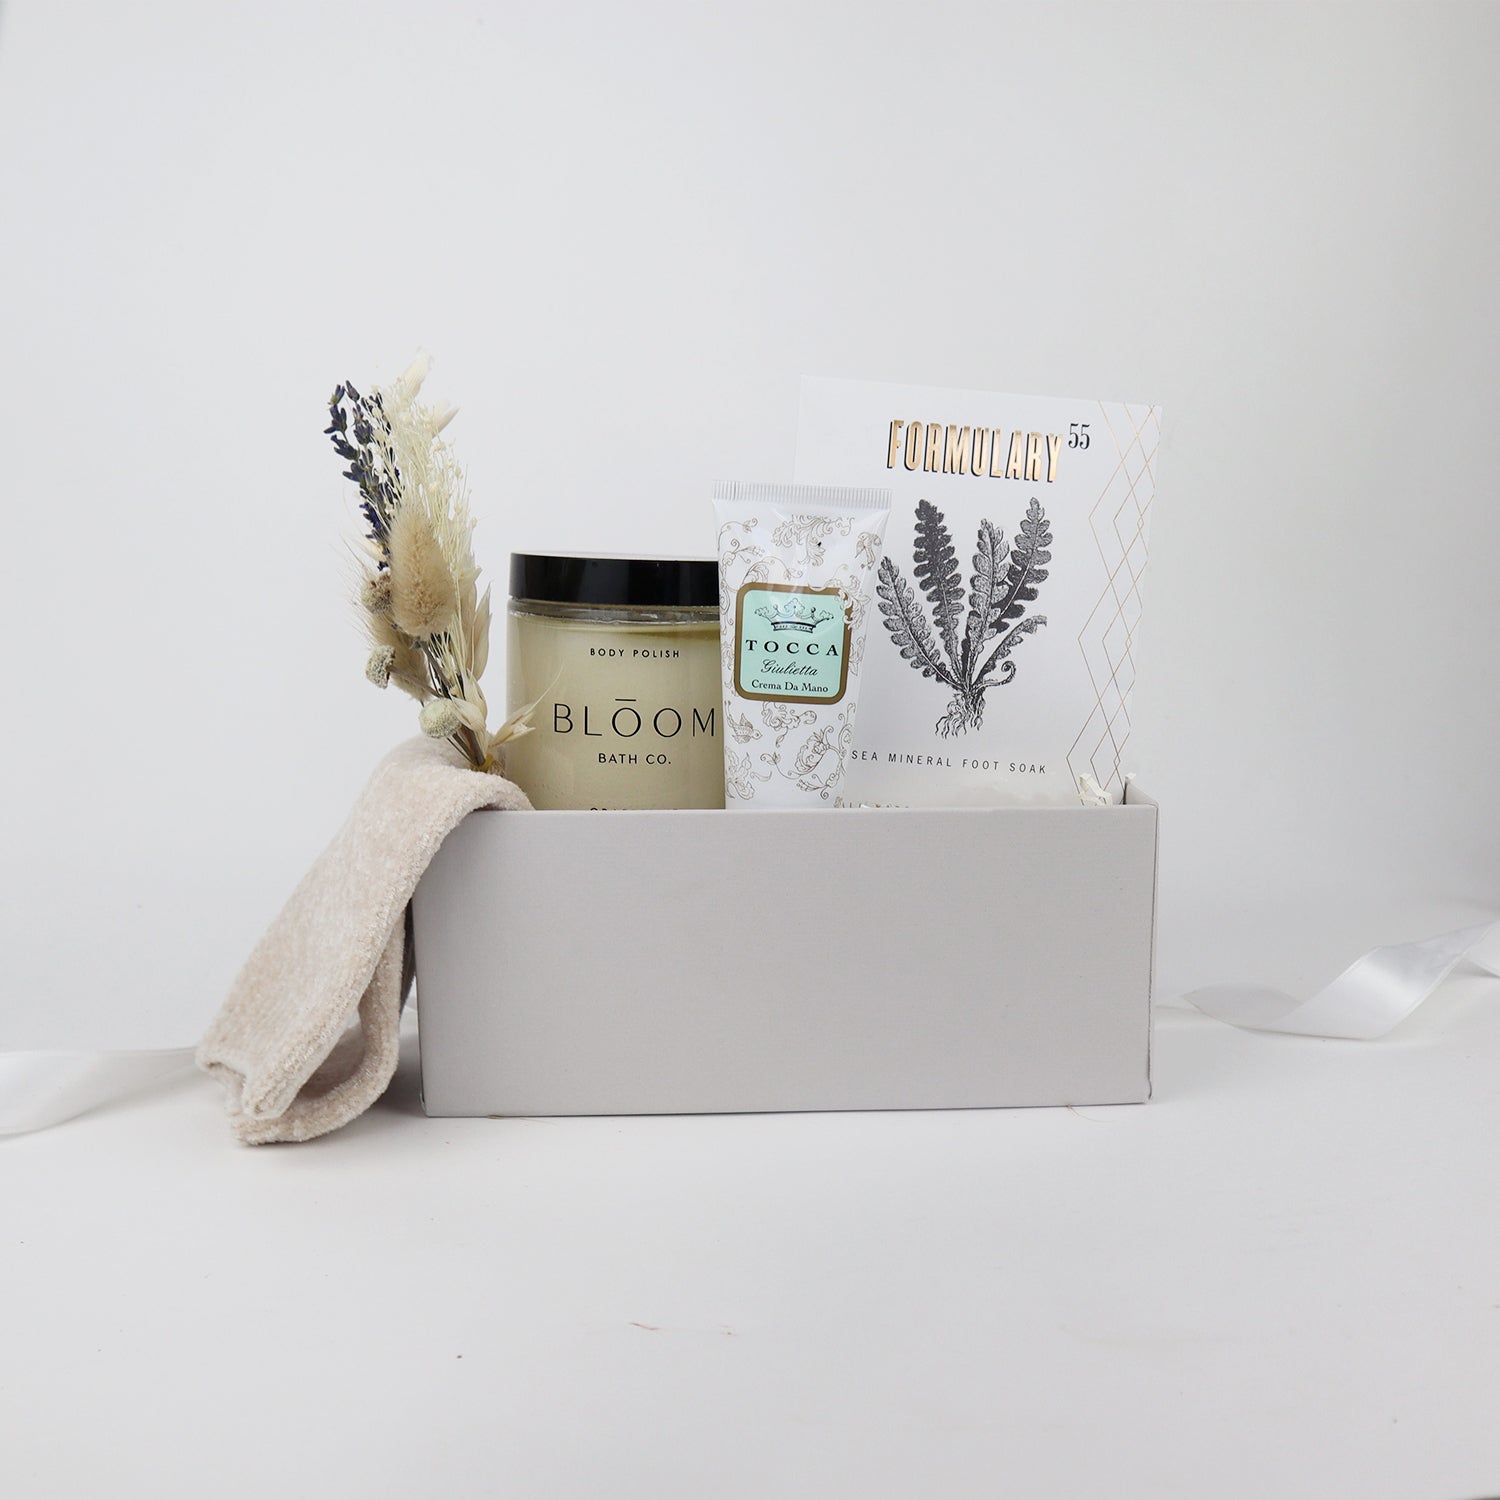 Nude chenille cozy socks,  glass jar of bloom bath co grapefruit body scrub, a dried floral bundle, mini tube of tocca giulietta hand cream with golden floral filigree design, packet of formulary 55 peppermint and eucalyptus sea mineral foot soak arranged in a light grey box with white paper shred.